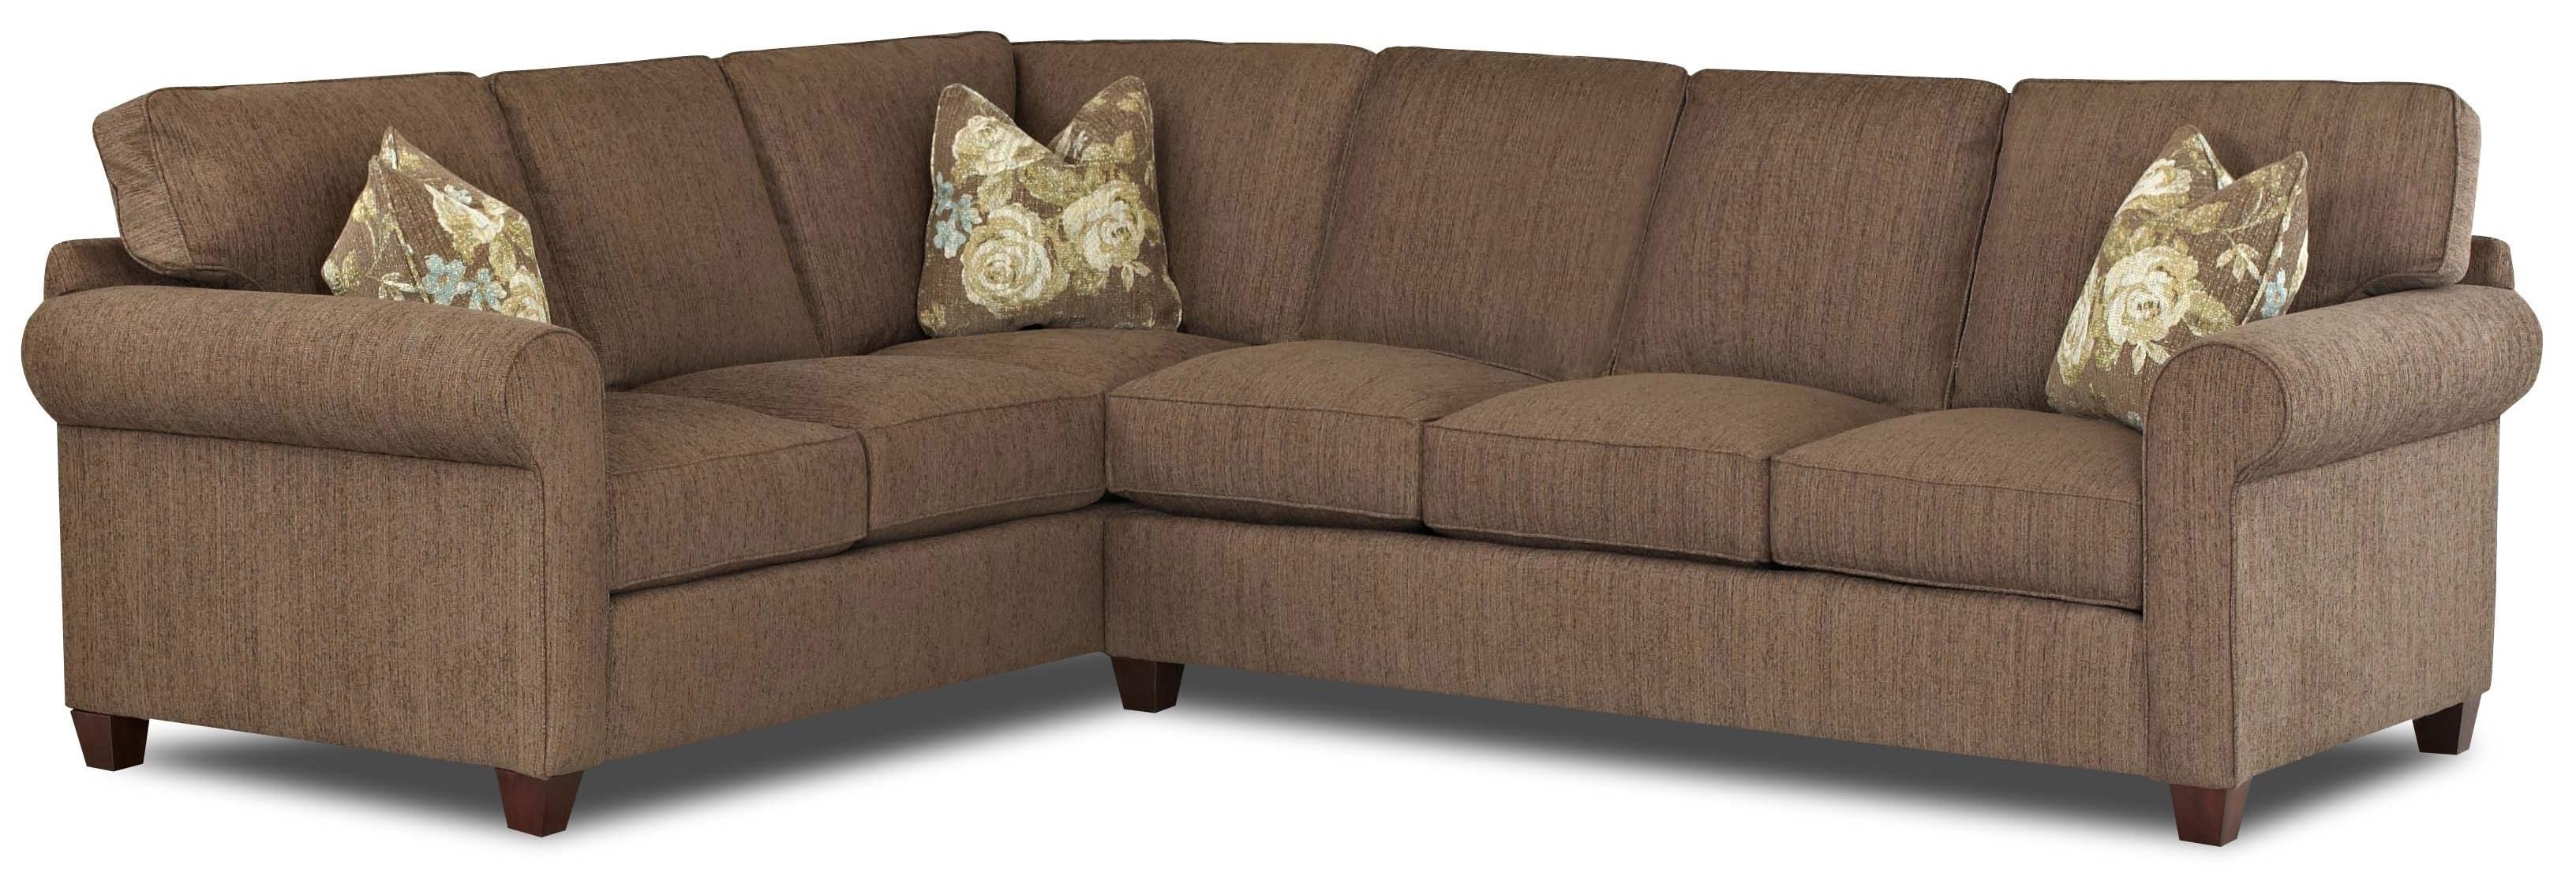 Sectional Sofa Lancaster Pa | Glif With Regard To Lancaster Pa Sectional Sofas (View 2 of 10)